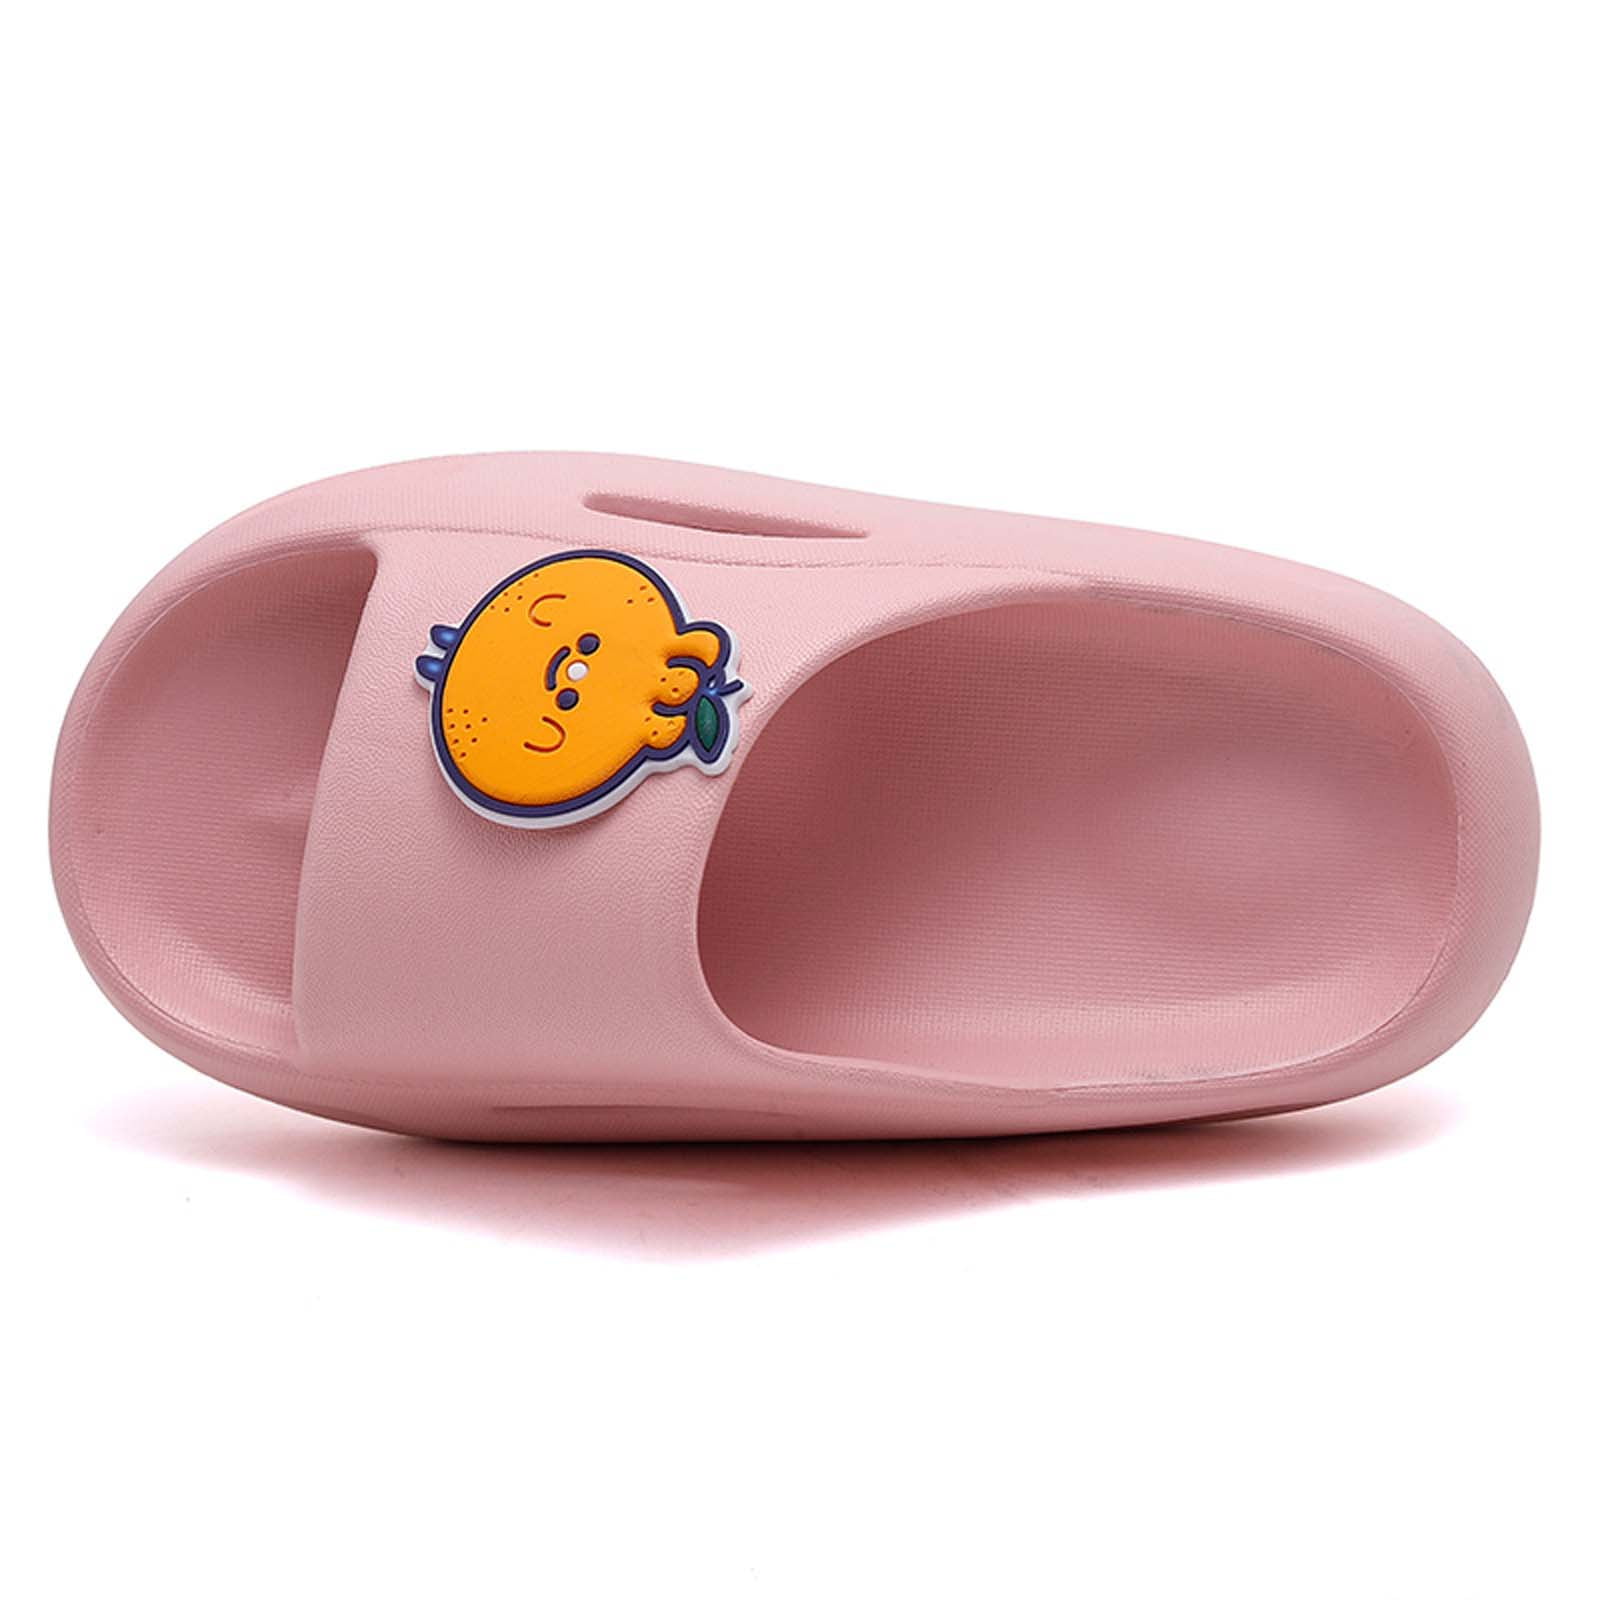  COVS Cloud Slides for Kids, Boys Girls Pillow Slides Shower  Slippers Bathroom Pool Sandals Comfy Thick Sole House Slippers Summer  Non-Slip Beach Shoes